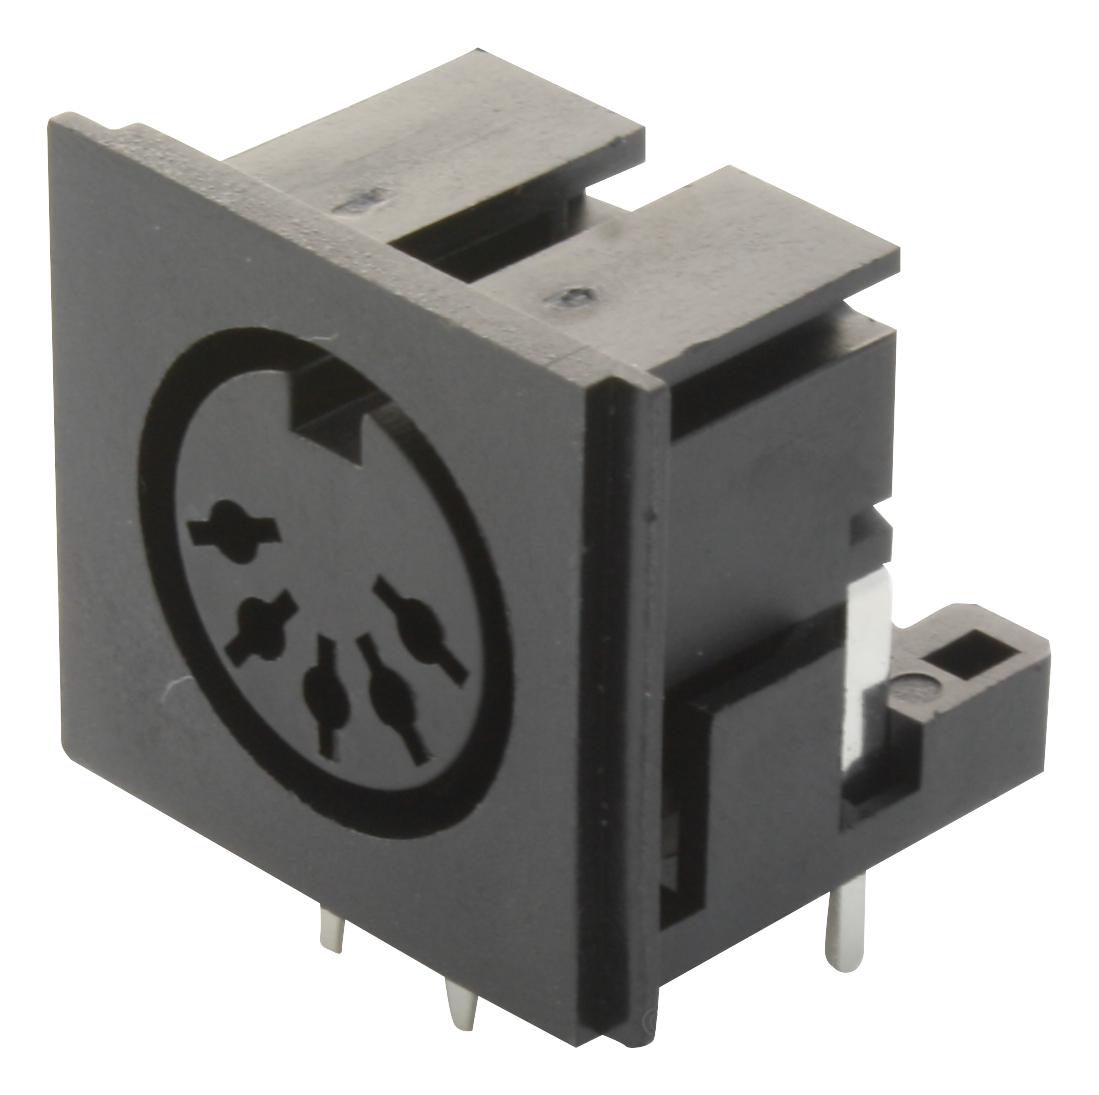 0105 05 DIN CONNECTOR, RCPT, 5POS, CHASSIS LUMBERG